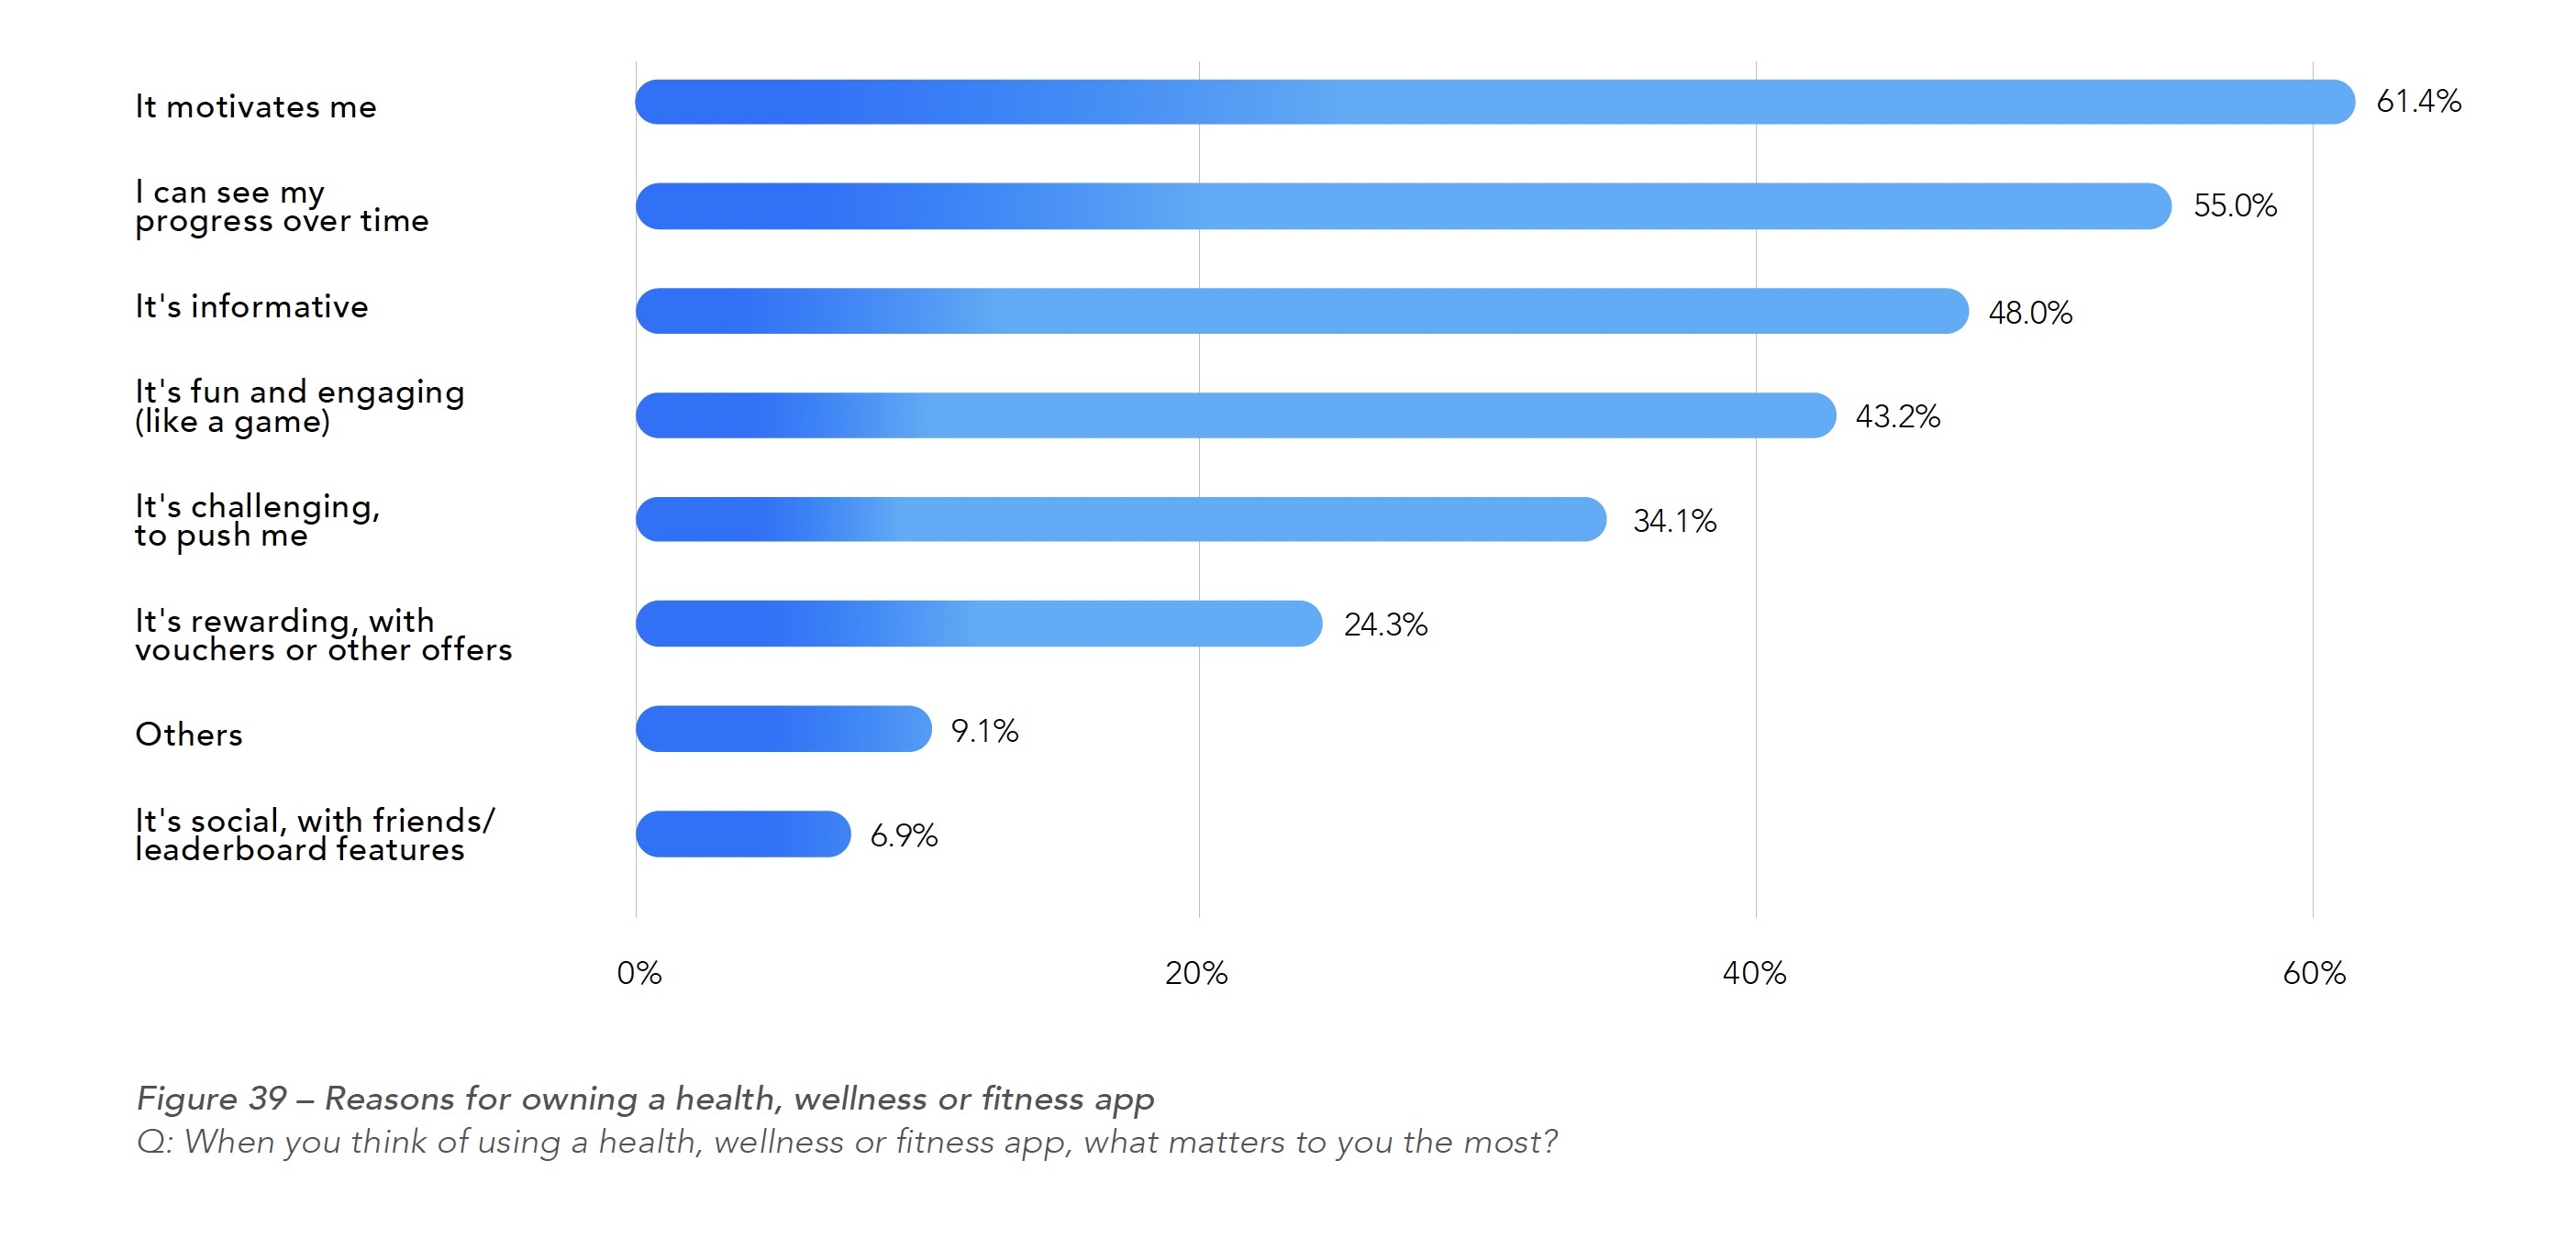 Figure 39 – Reasons for owning a health, wellness or fitness app Q: When you think of using a health, wellness or fitness app, what matters to you the most?